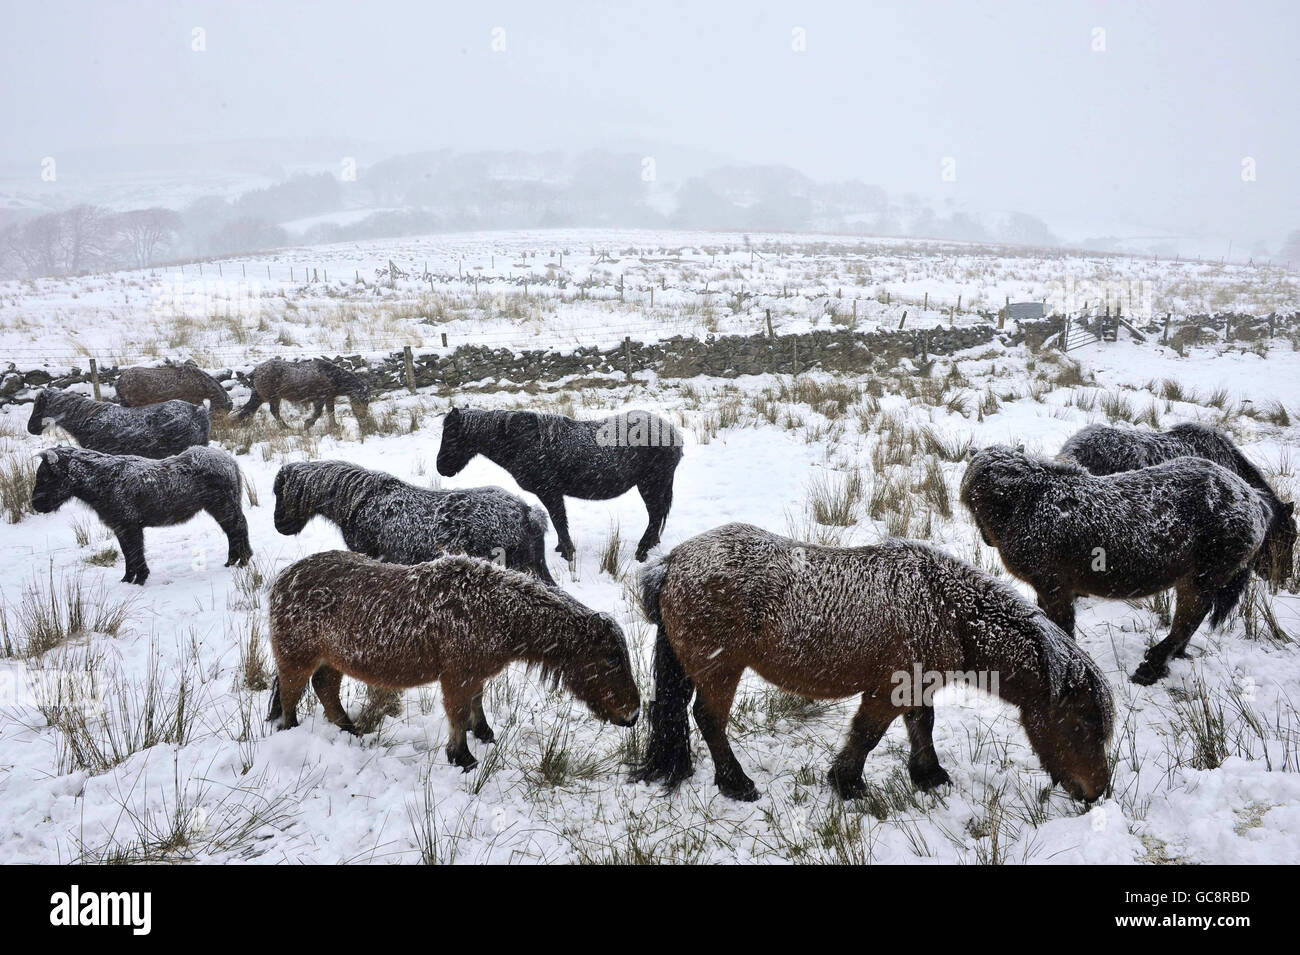 Dartmoor ponies brave the fresh batch of snow that falls in the South West of the UK near Two Bridges, Dartmoor, Devon. Stock Photo